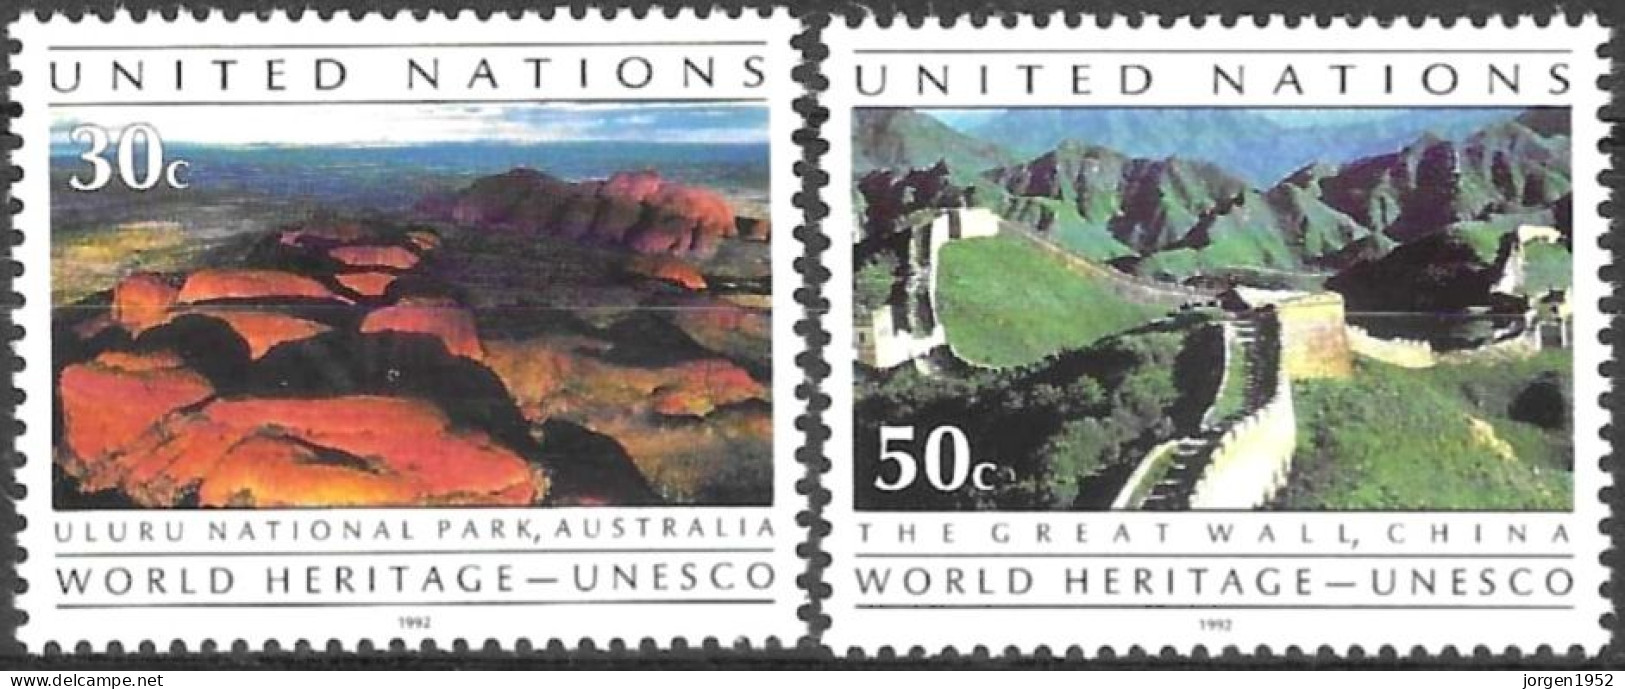 UNITED NATIONS # NEW YORK FROM 1992 STAMPWORLD 625-26** - Neufs